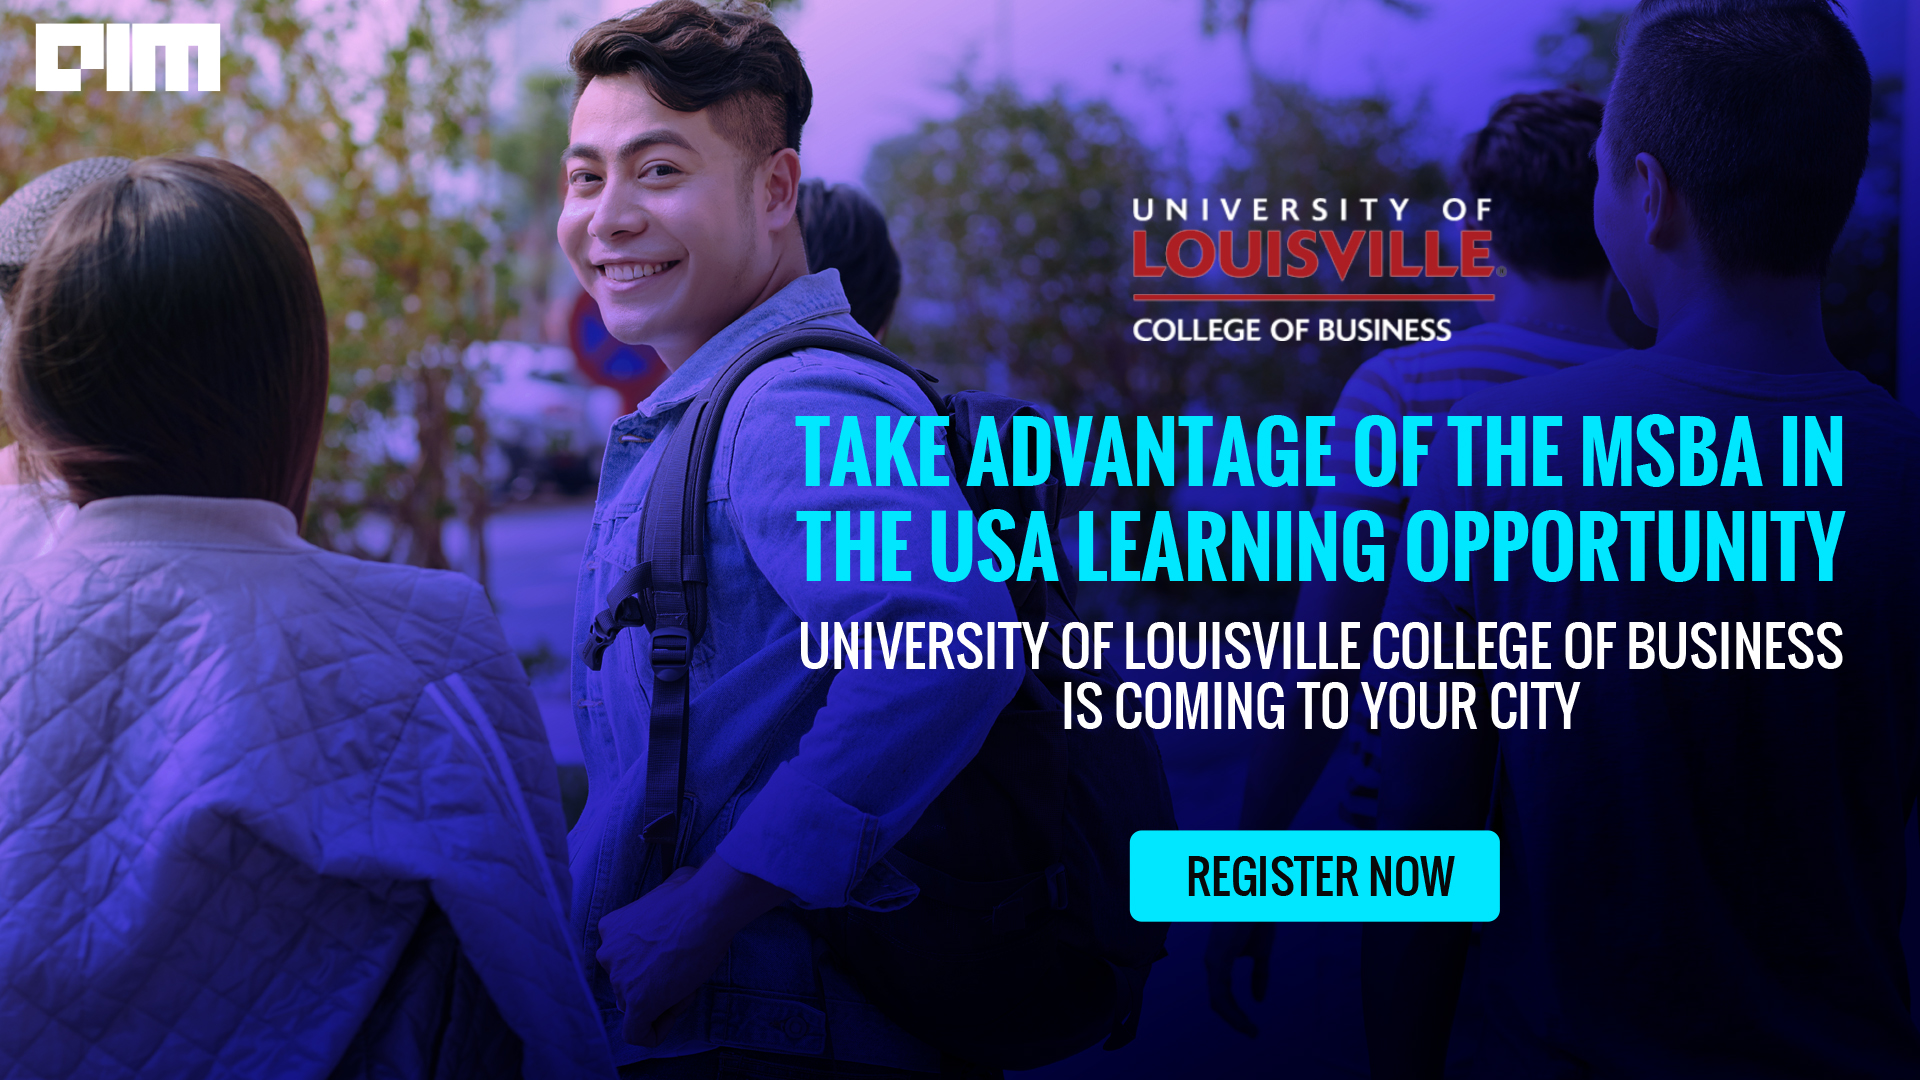 Take advantage of the MSBA in the USA Learning Opportunity — University of Louisville College of Business is coming to your city